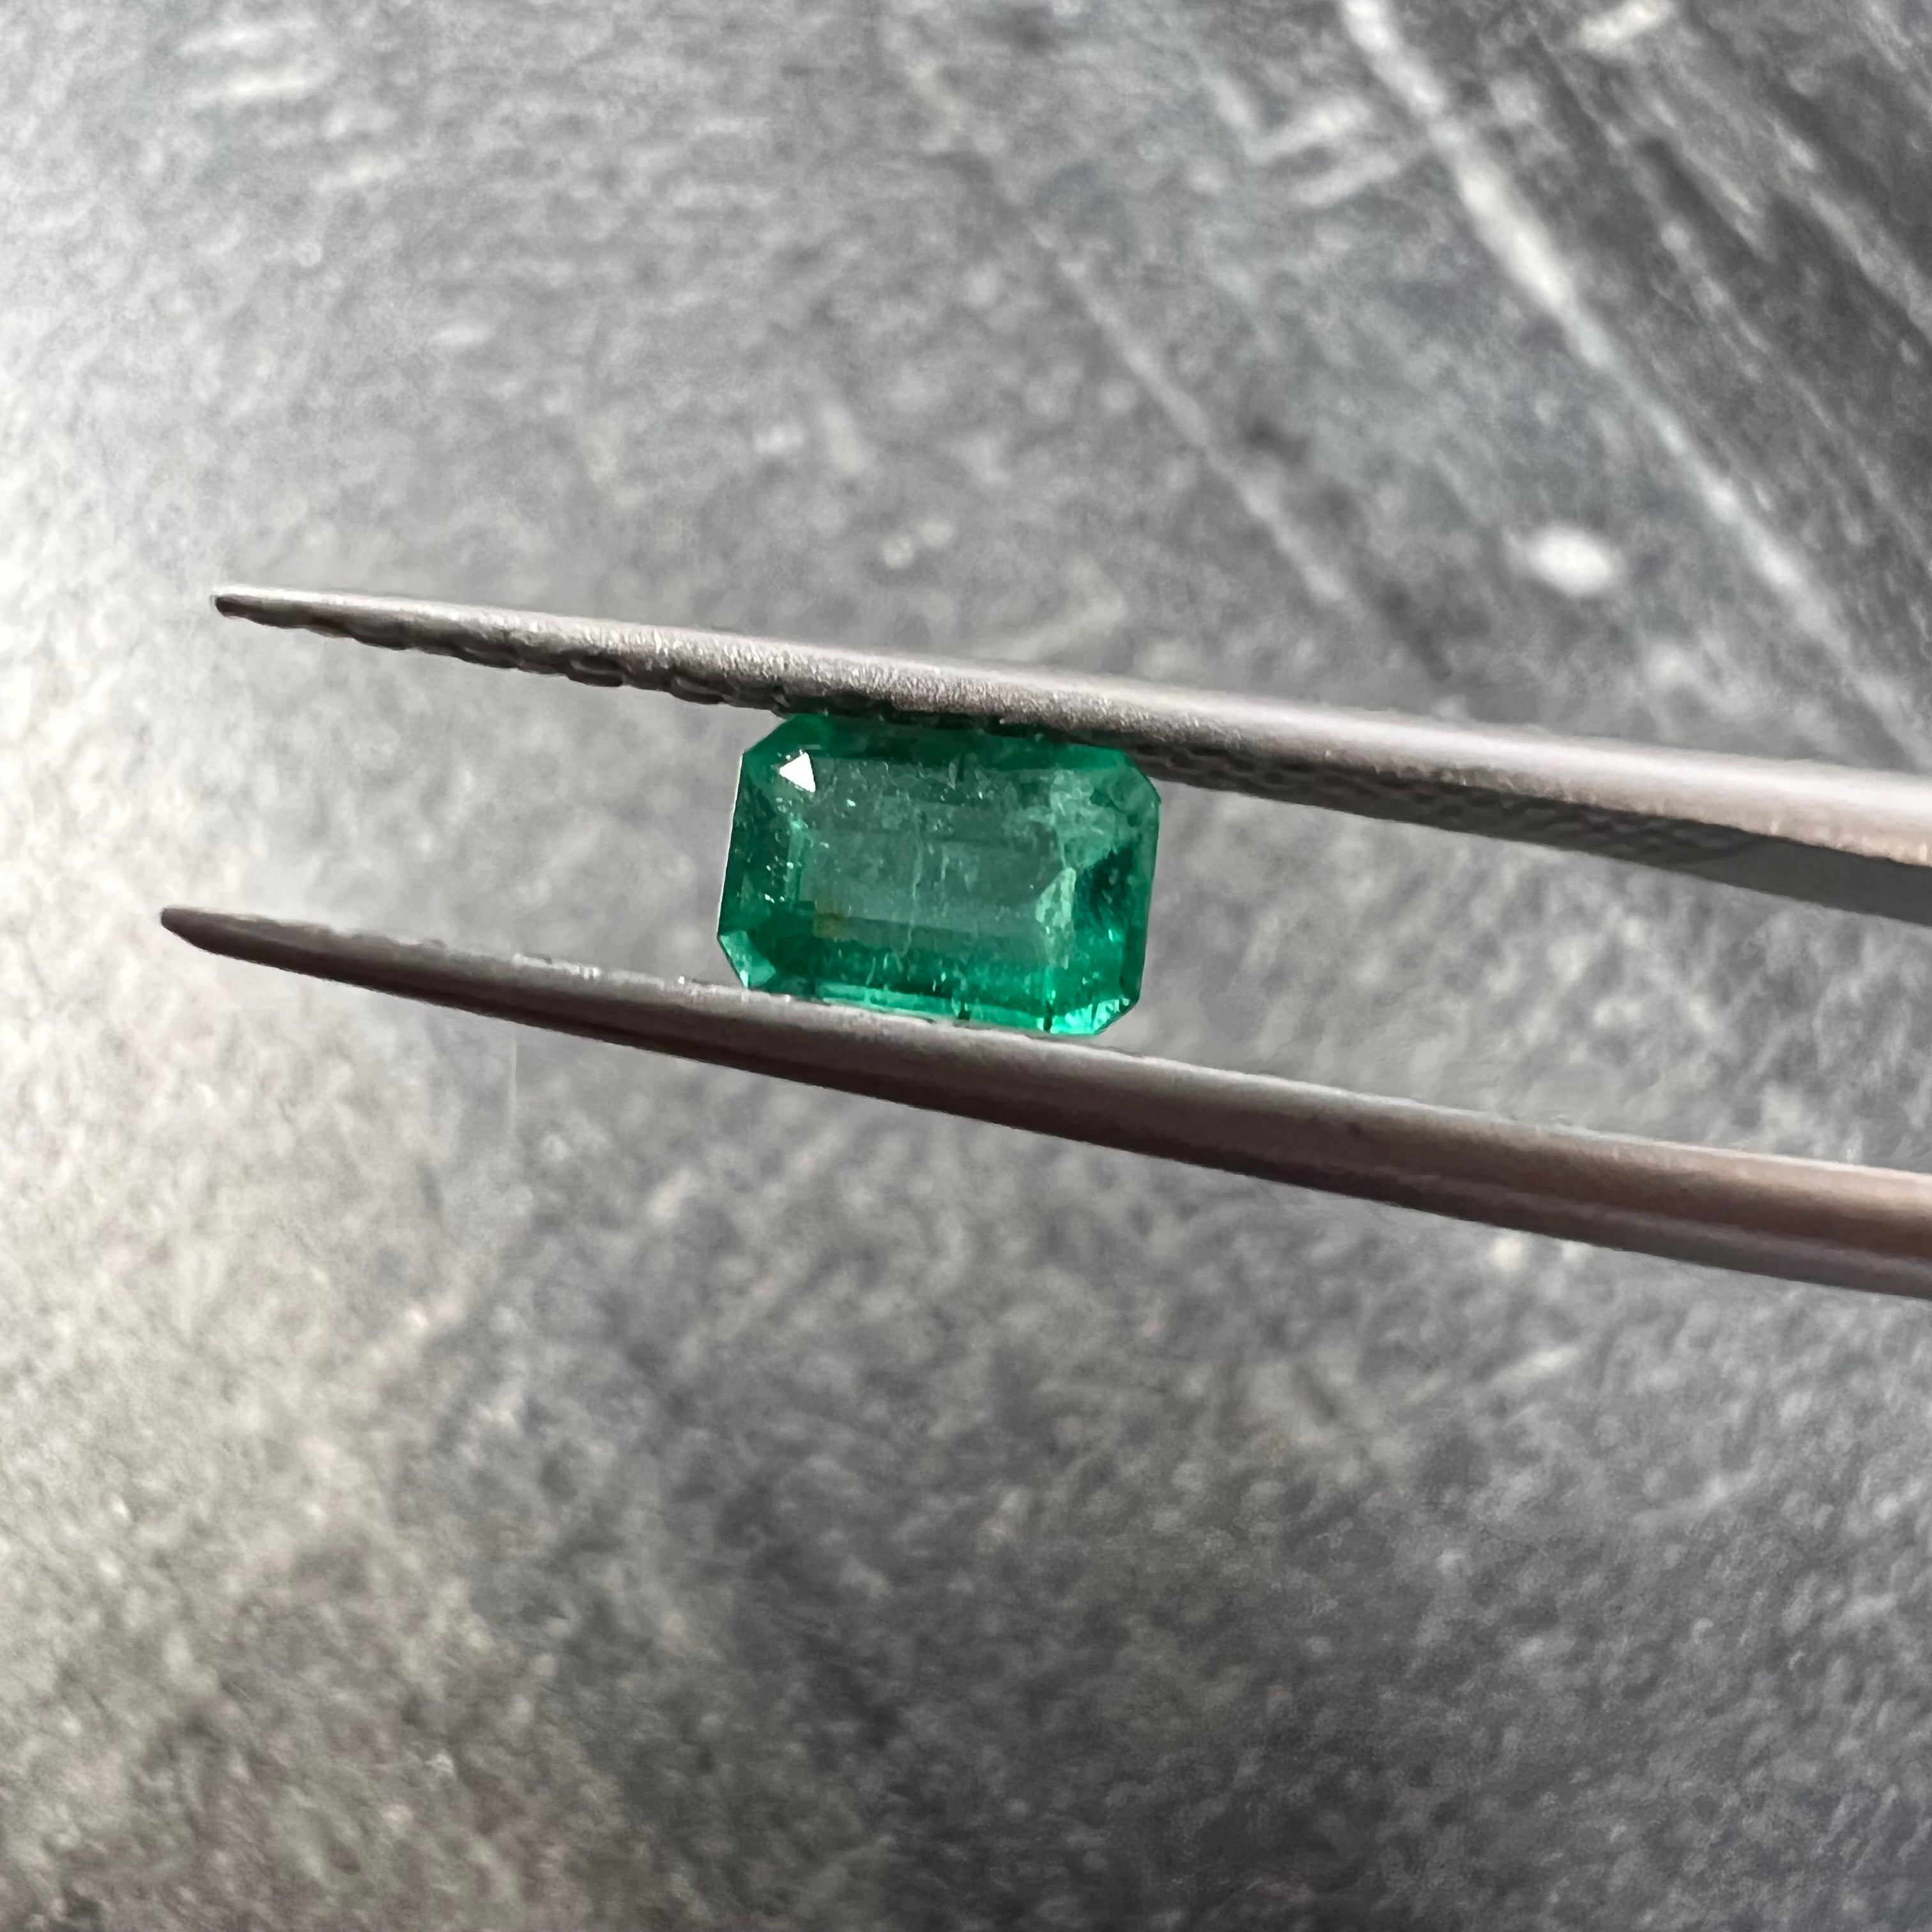 .41CT Loose Natural Colombian Emerald Cut 5.79x3.84x2.38mm Earth mined Gemstone